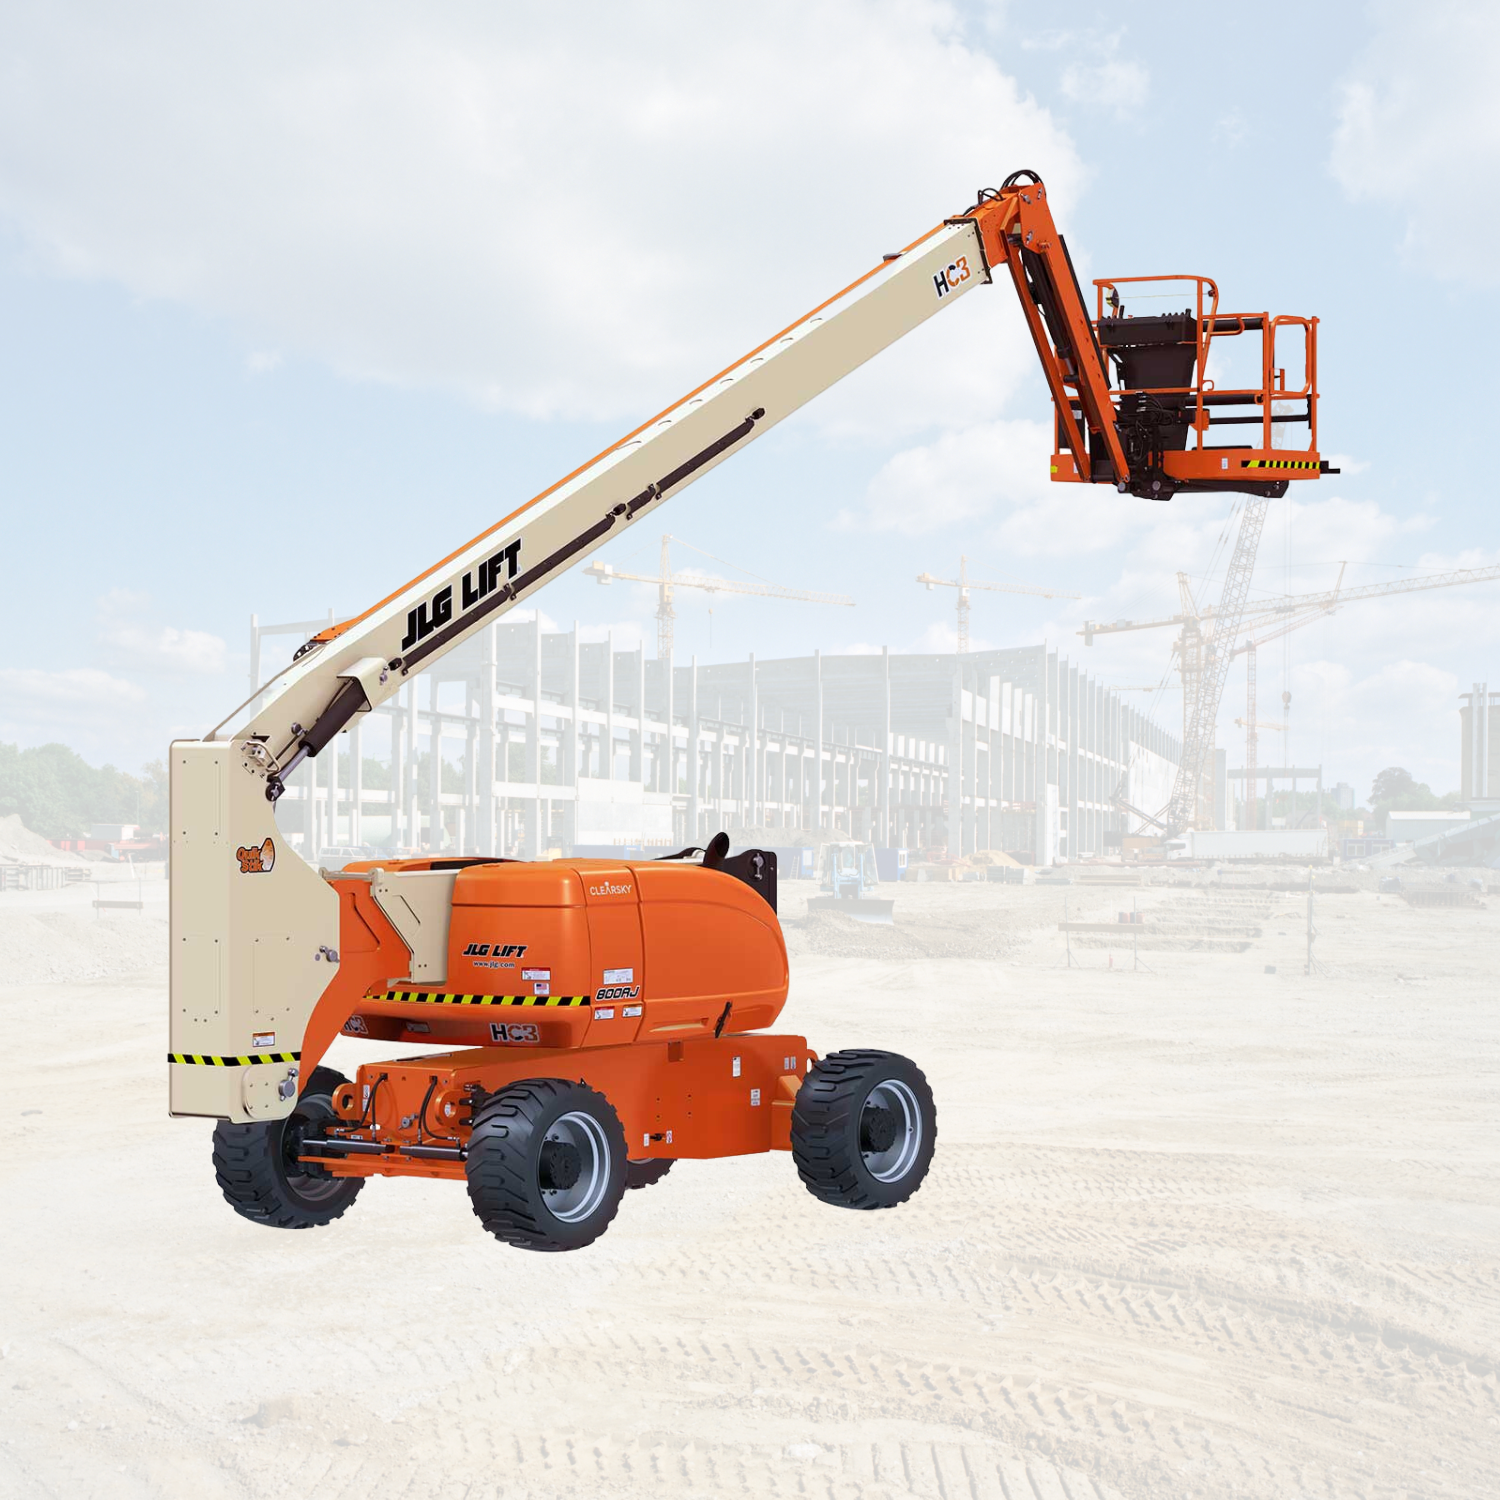 Save big on parts for your JLG